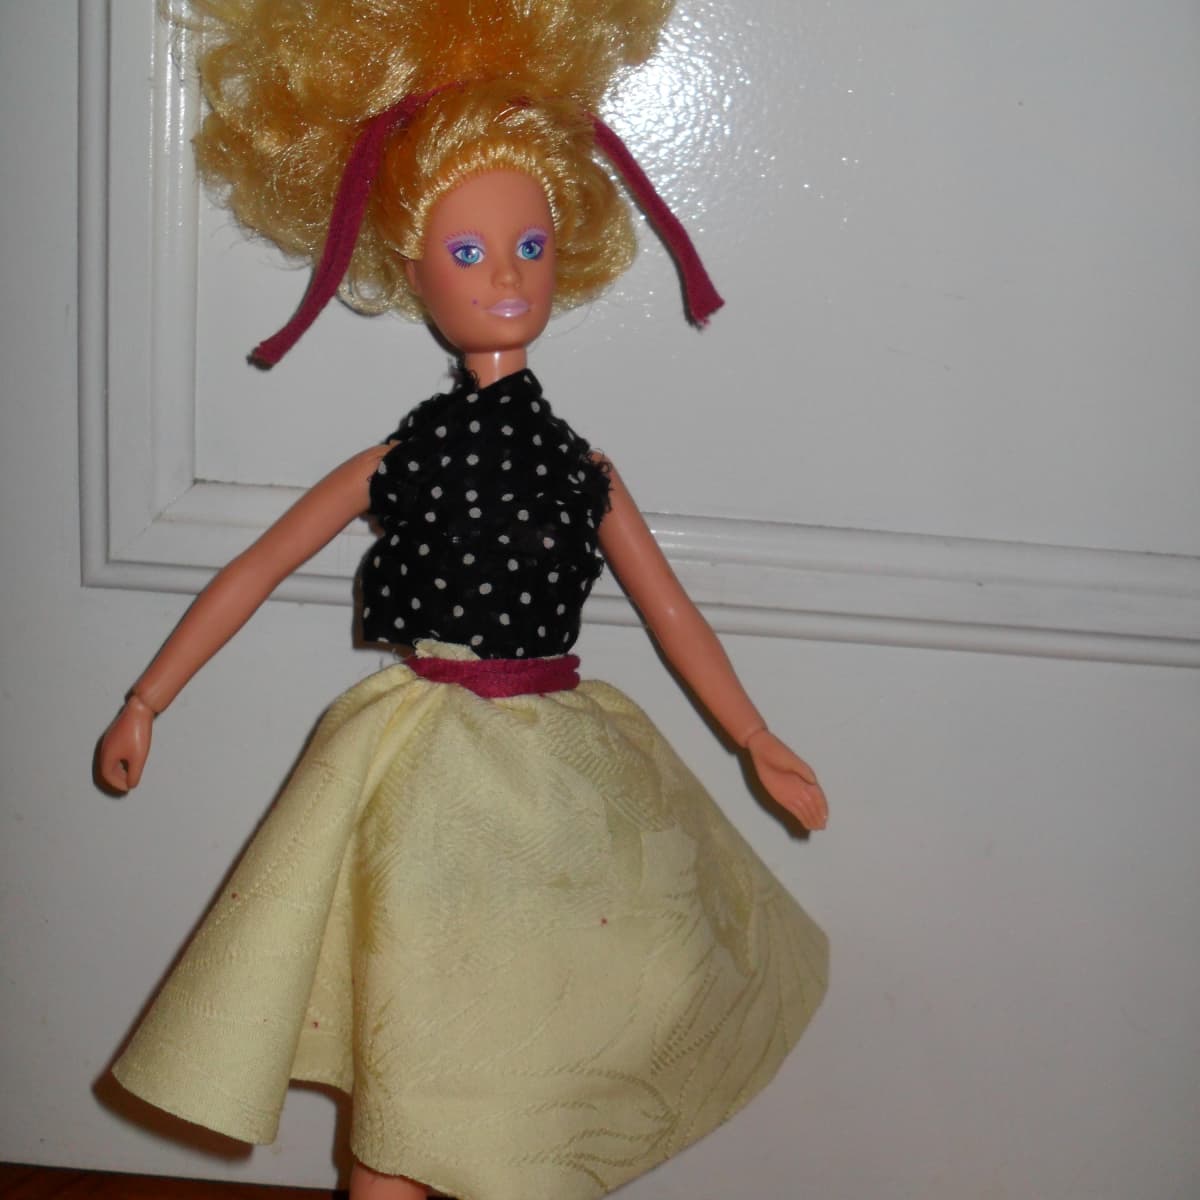 How to Make No-Sew Doll Clothes for Barbies and More! - FeltMagnet